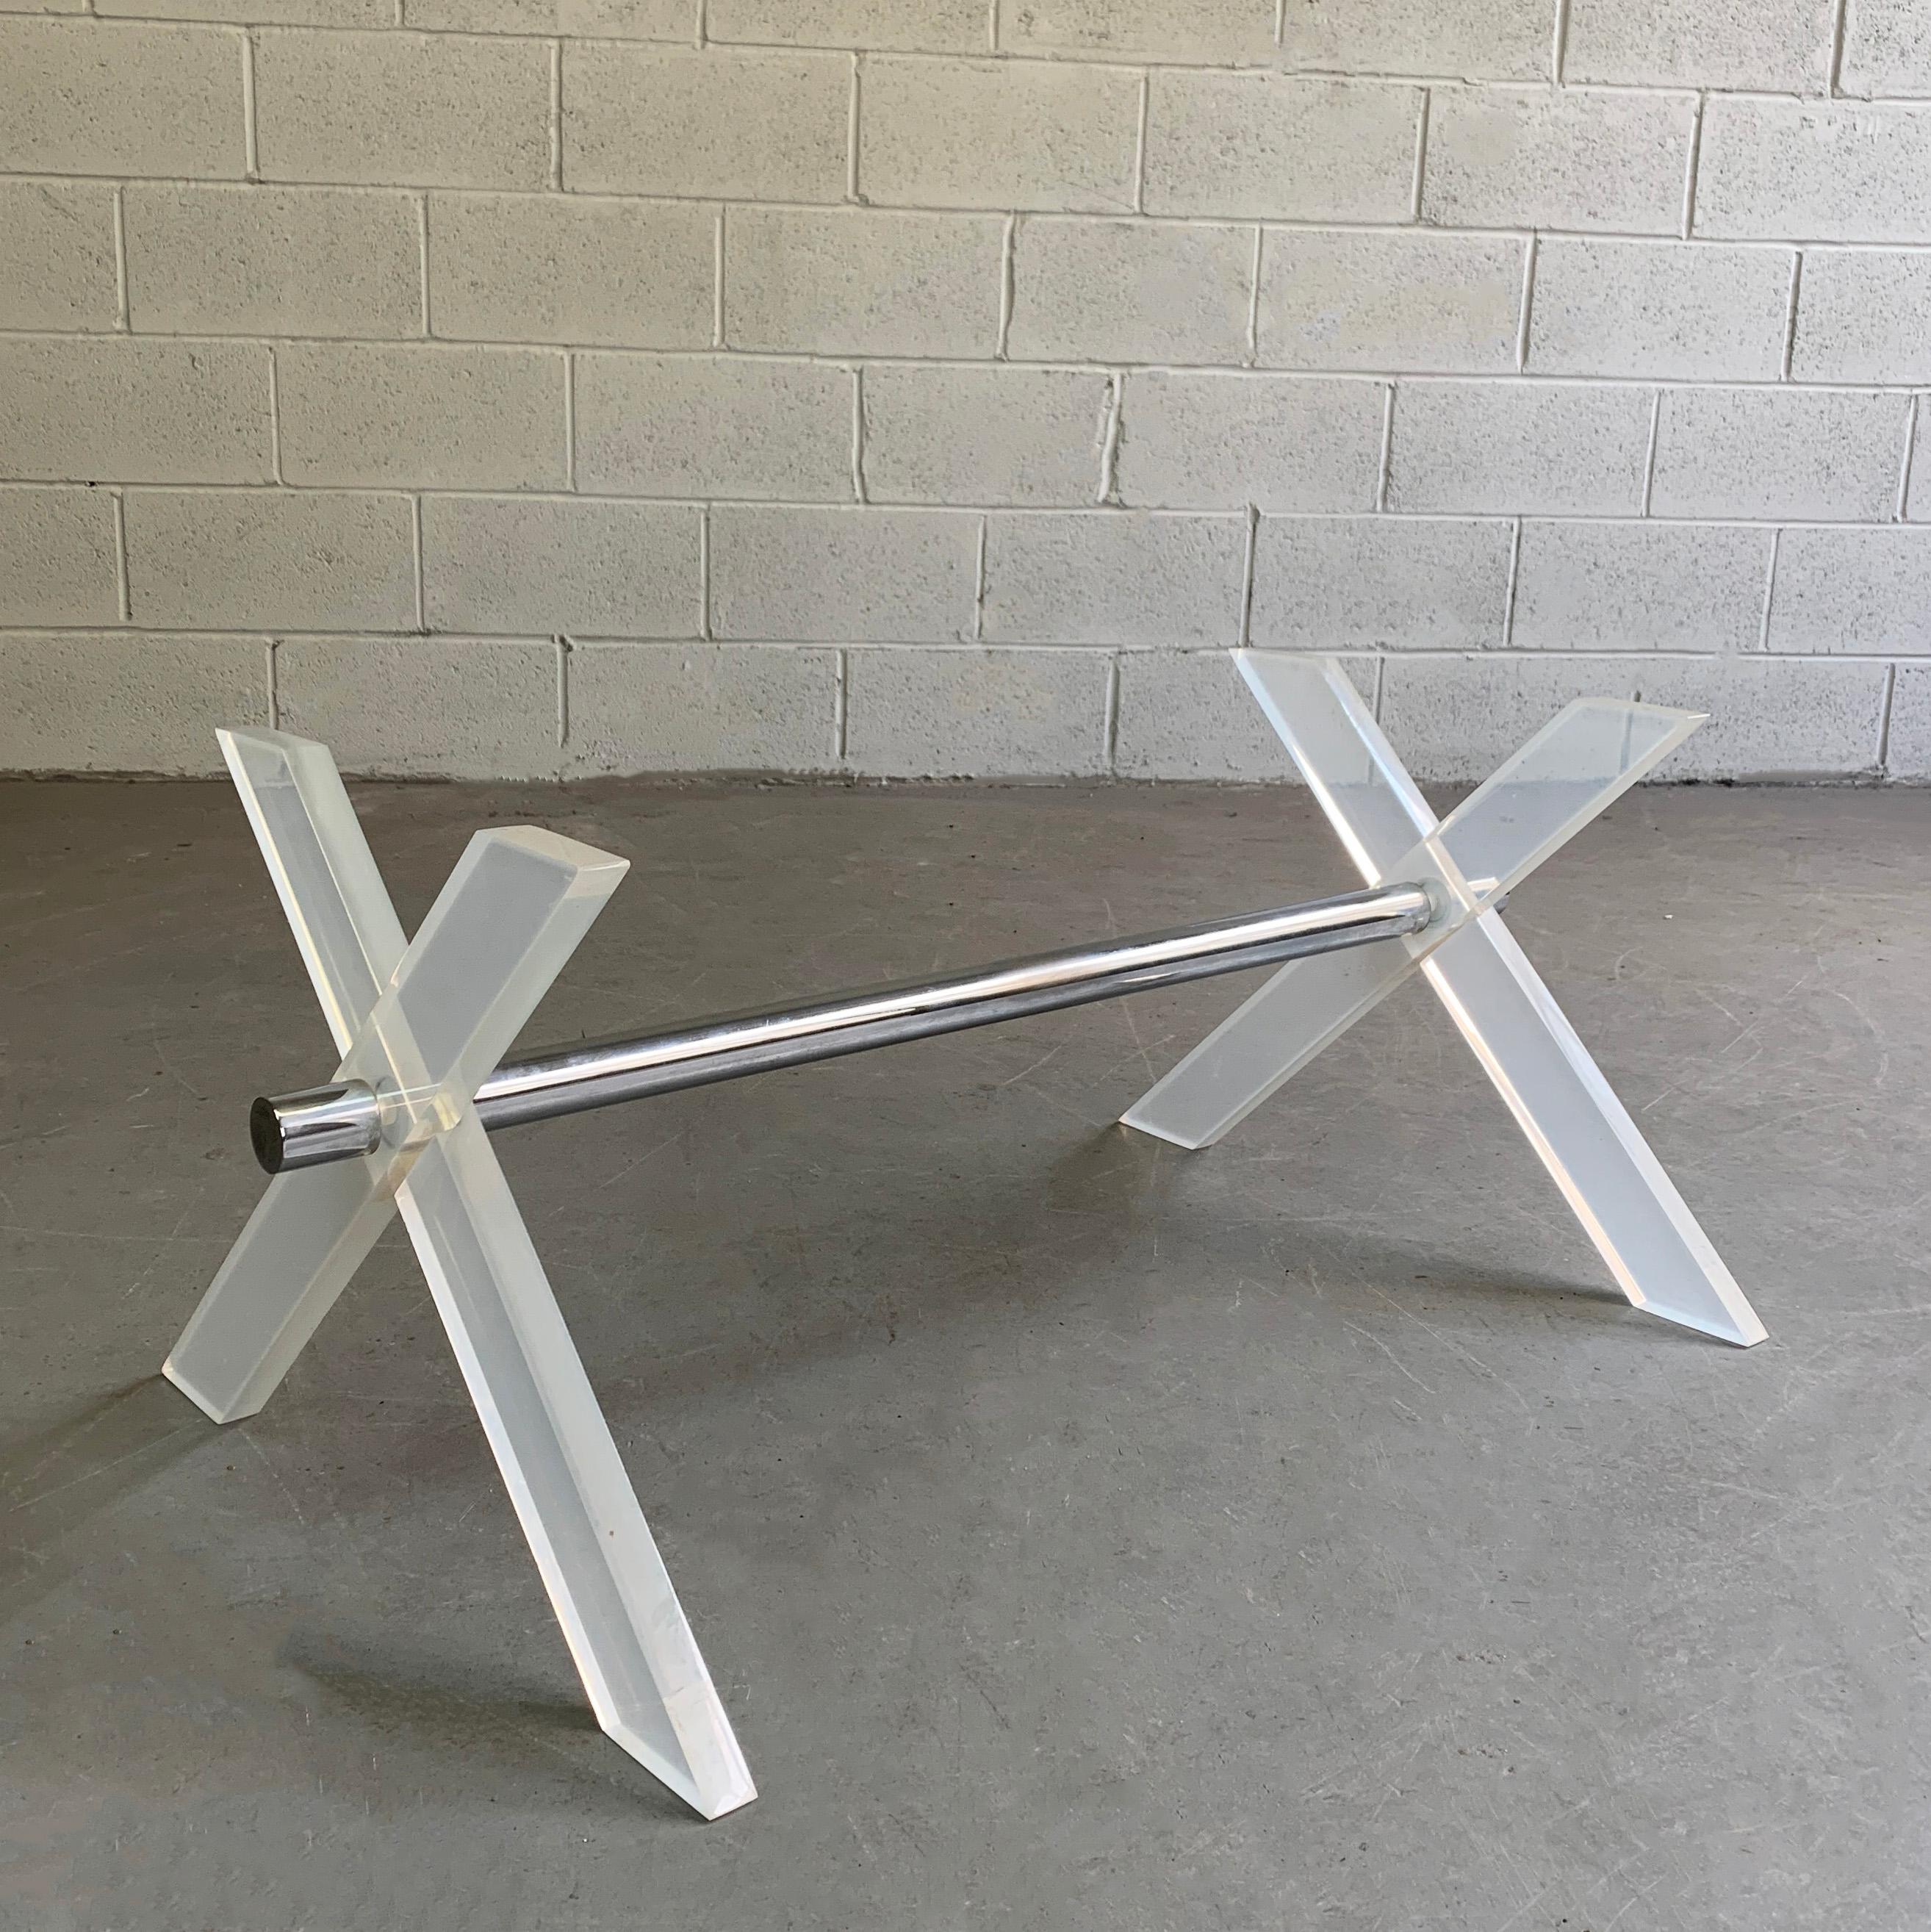 Slick, 1970s modern, coffee table base features two, 1 inch thick, Lucite X-forms connected by a 1.5 inch chrome rod. The base can accept the size and shape top of your choice.